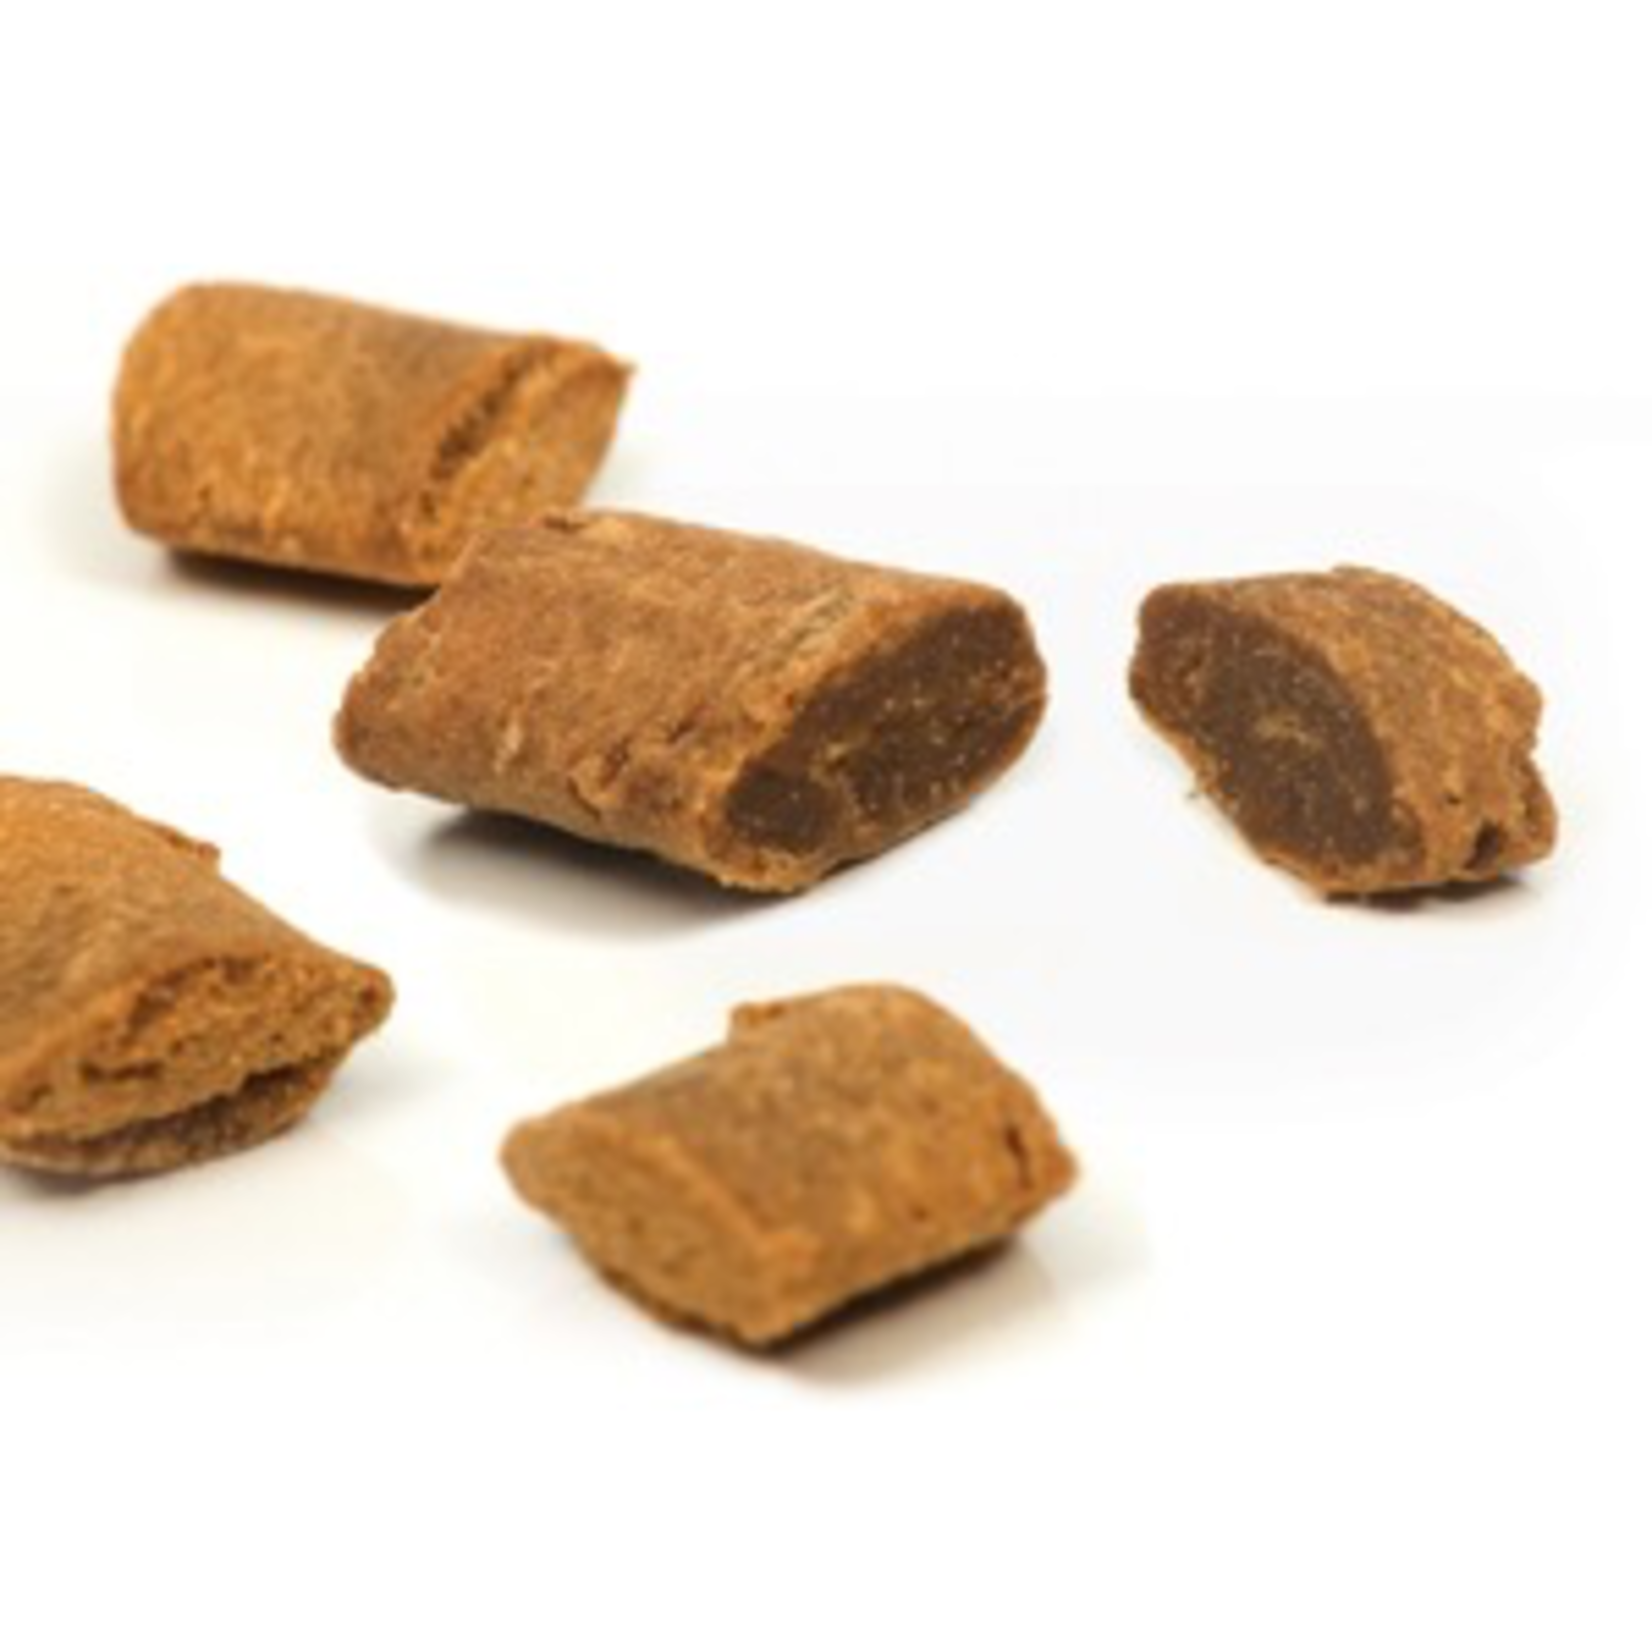 CAT IT CT Nibbly Cat Cookies -ChicknLiv, 90g